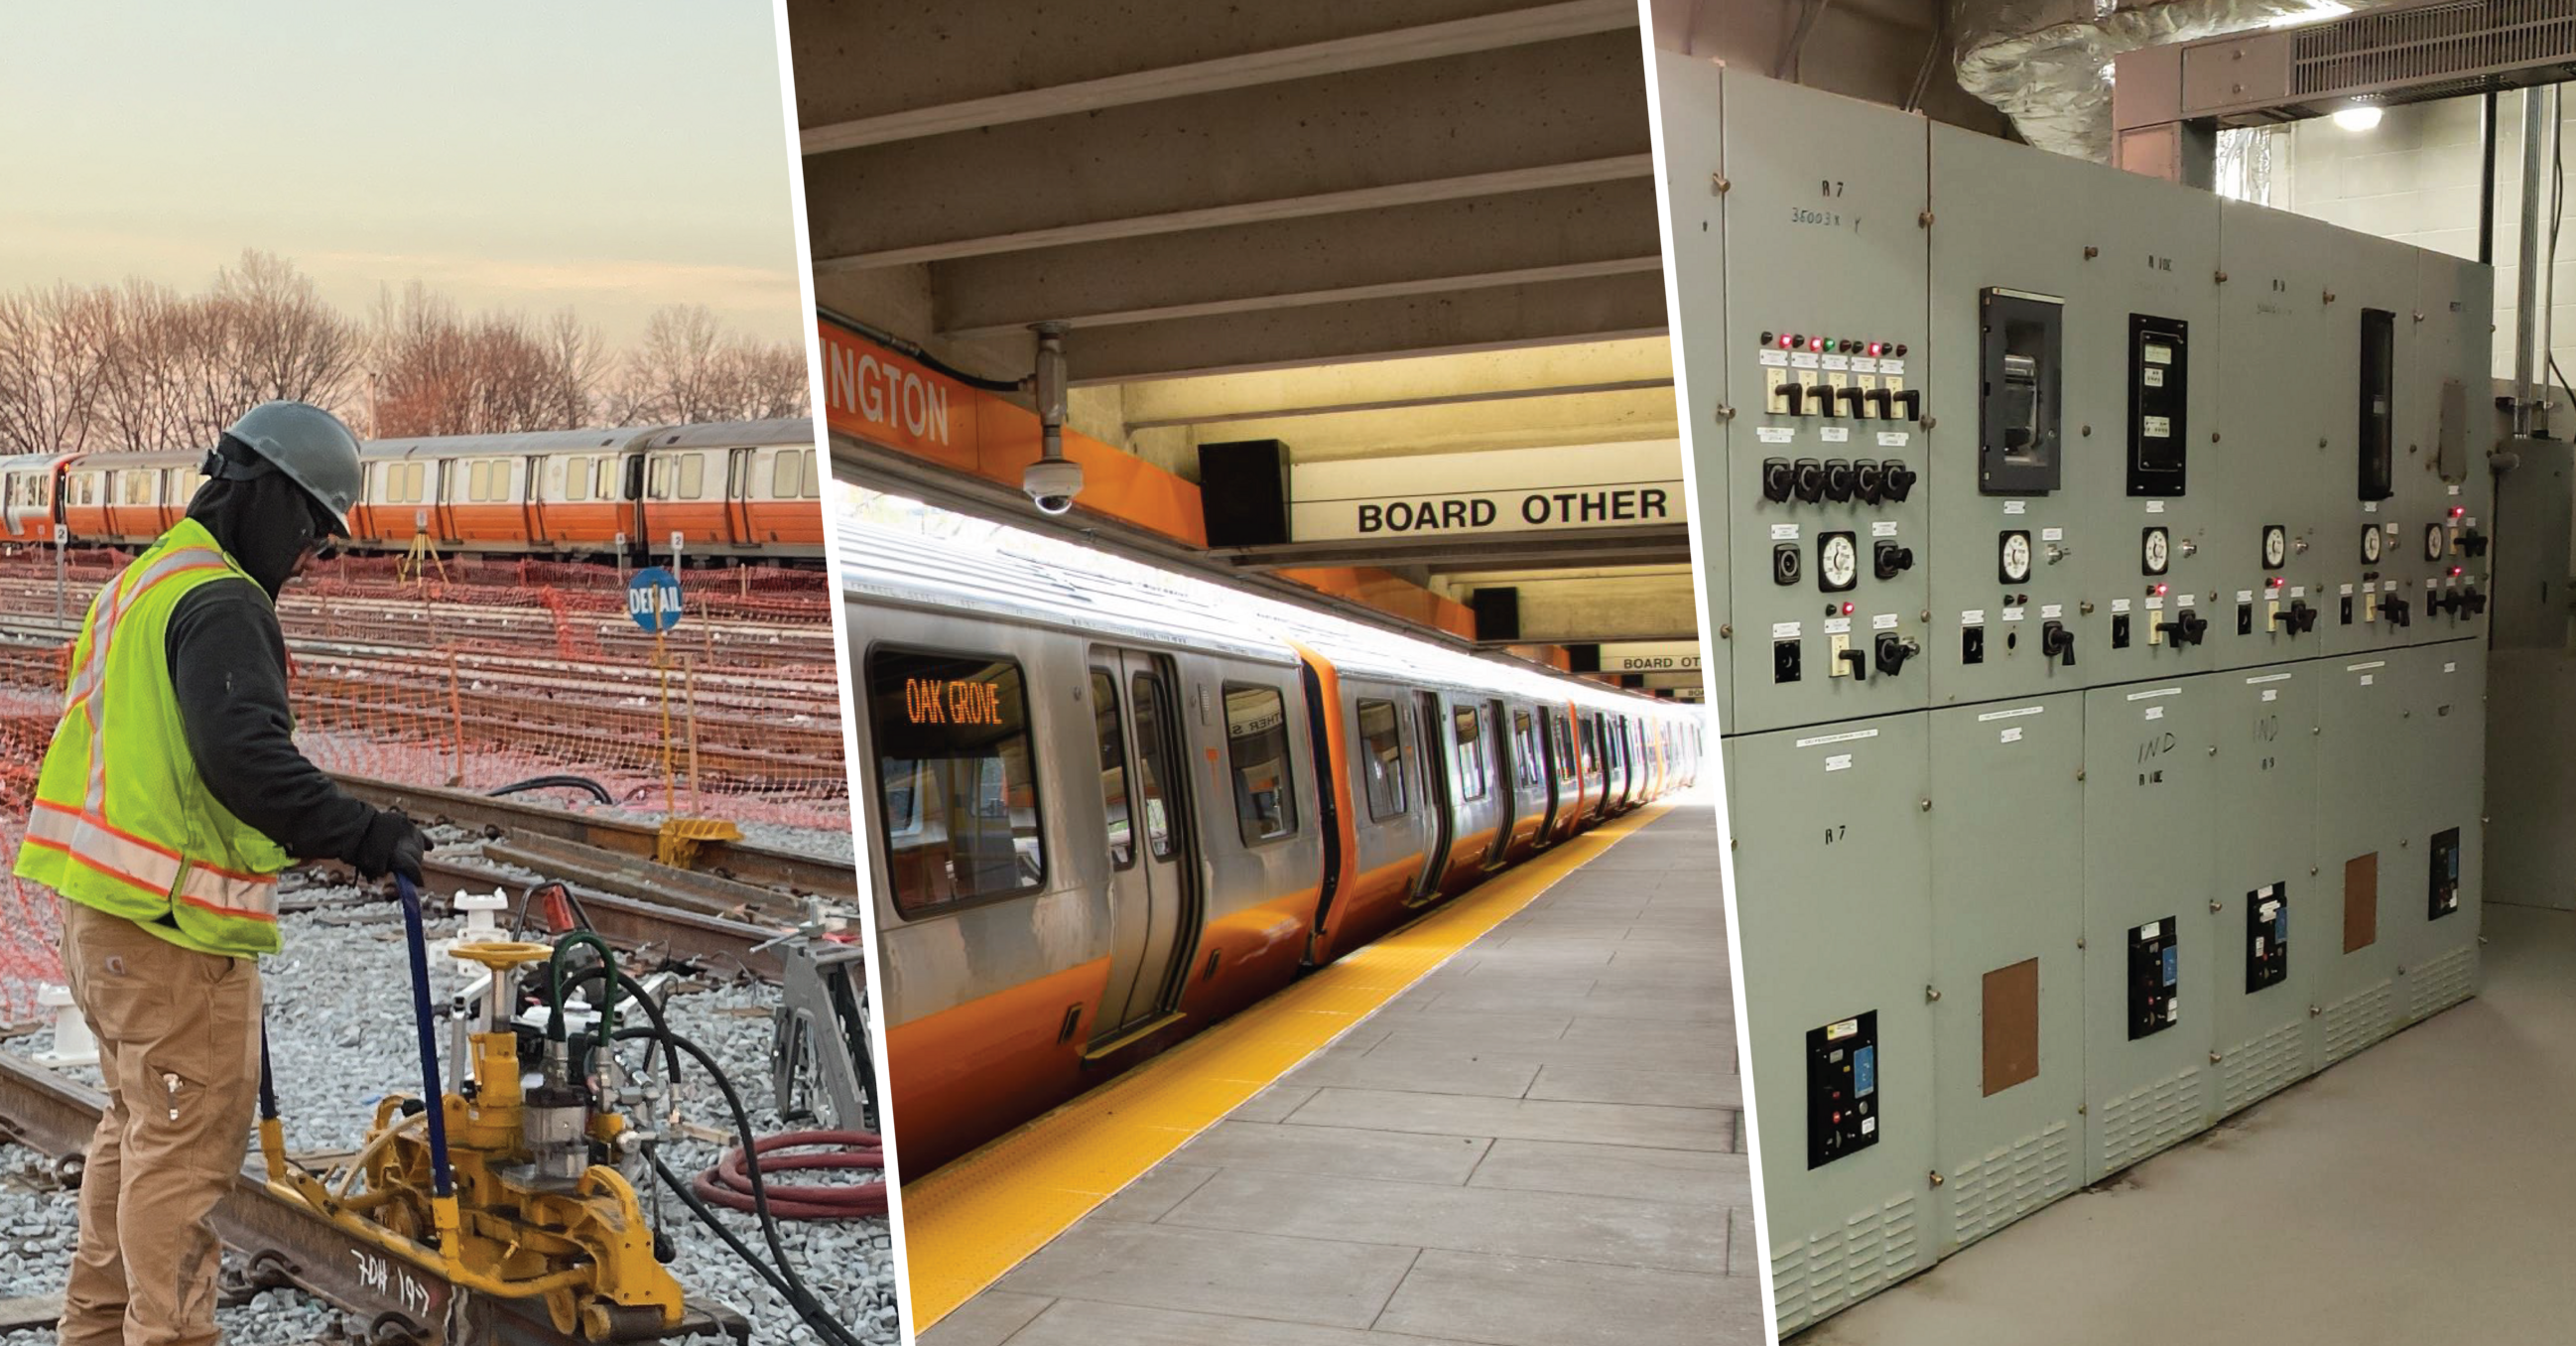 A photo of a construction worker with machinery on tracks, a photo of a new orange line train, and a photo of signal boxes